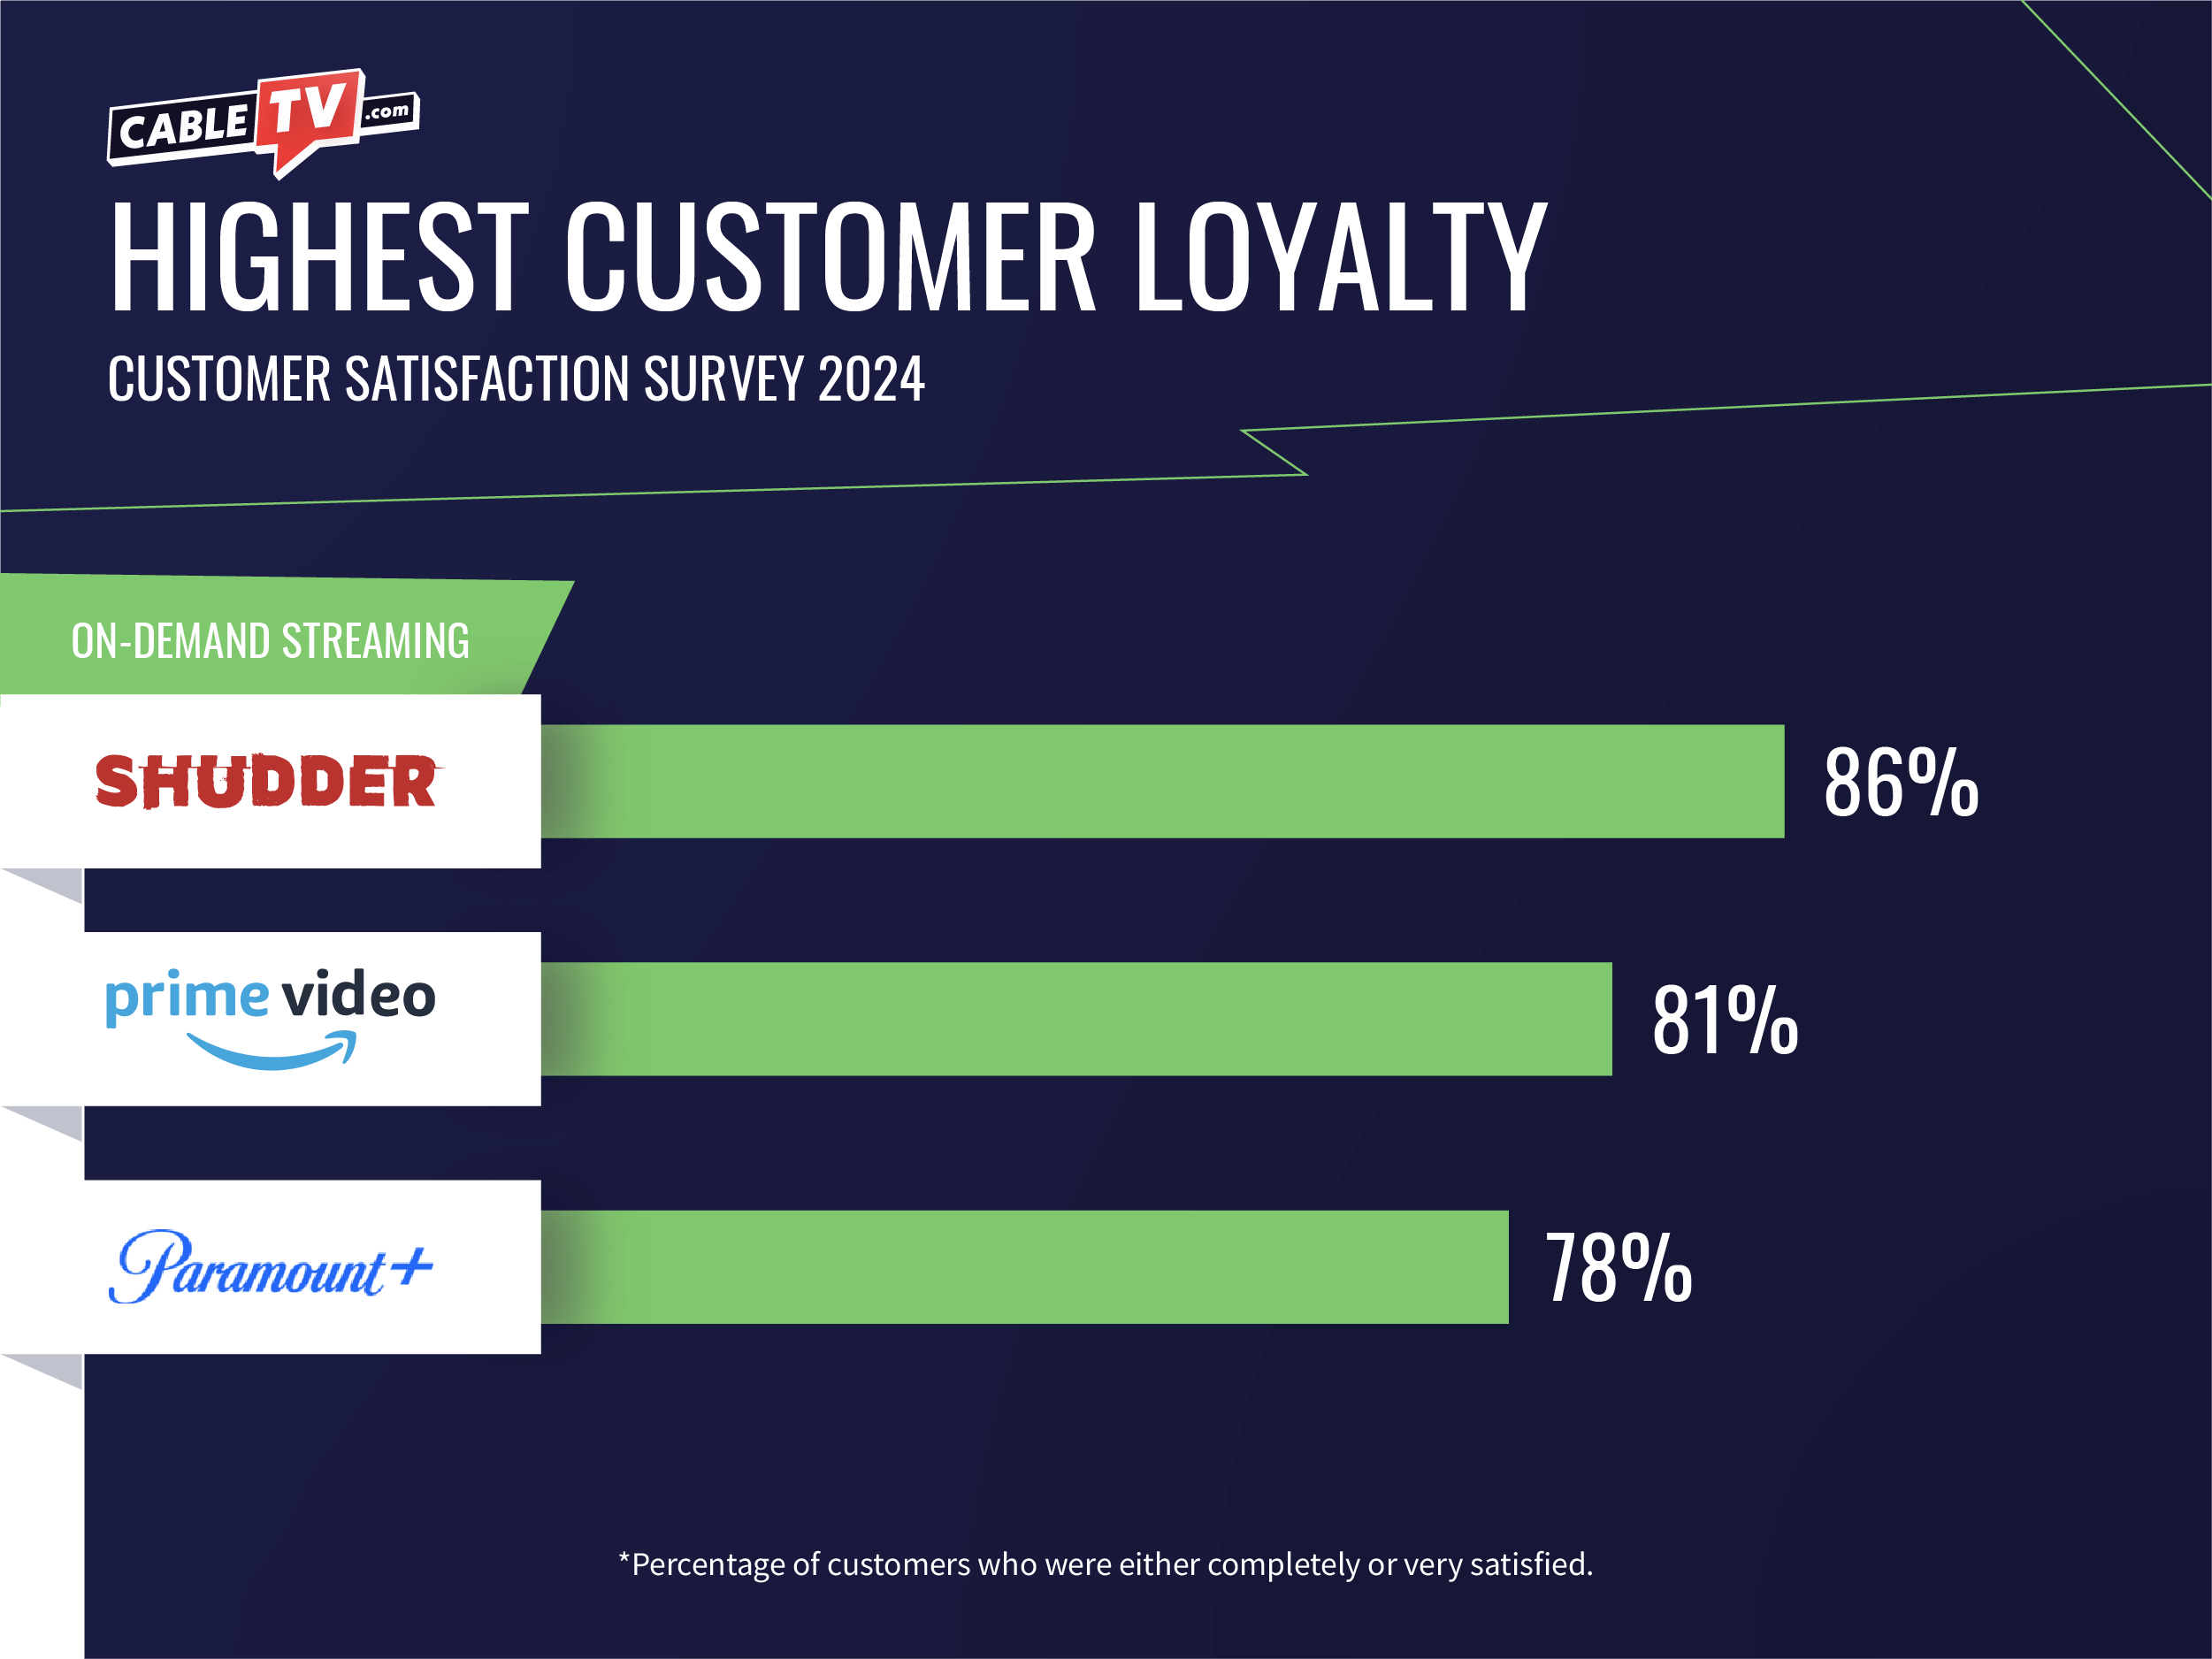 Shudder again takes first place for customer loyalty over Amazon Prime Video